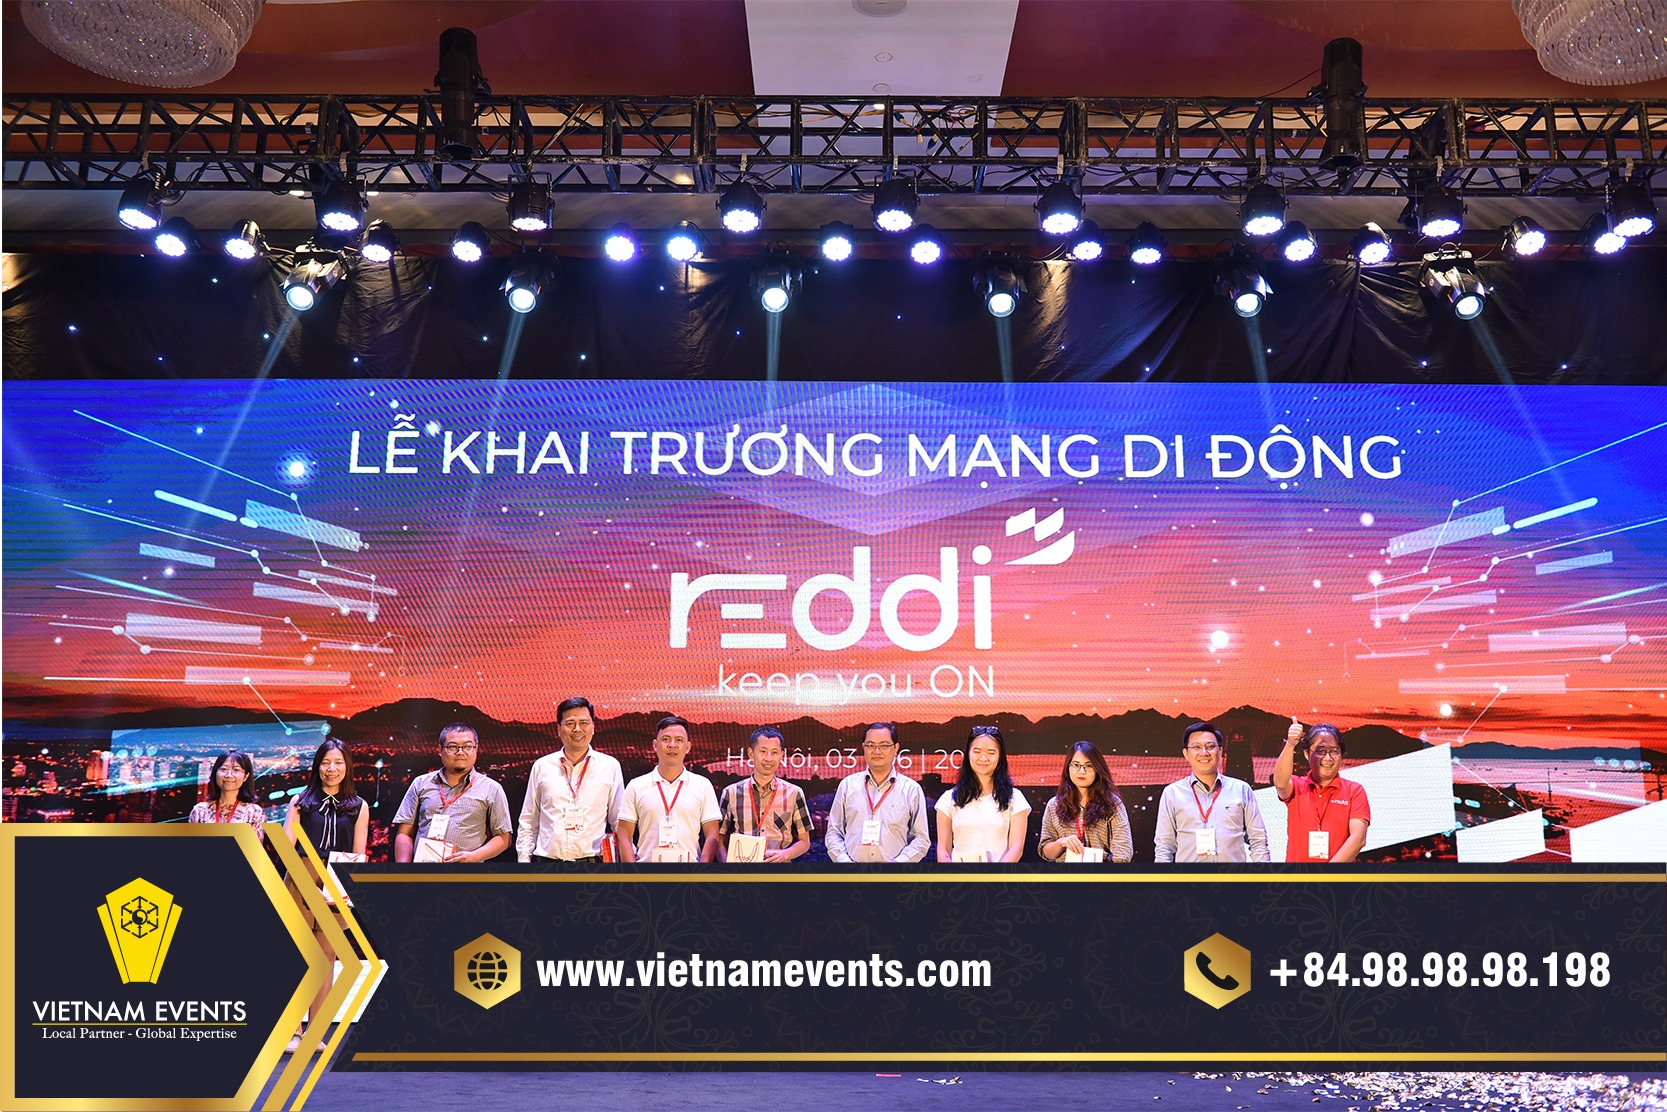 Reddi launched new Vietnam's mobile network